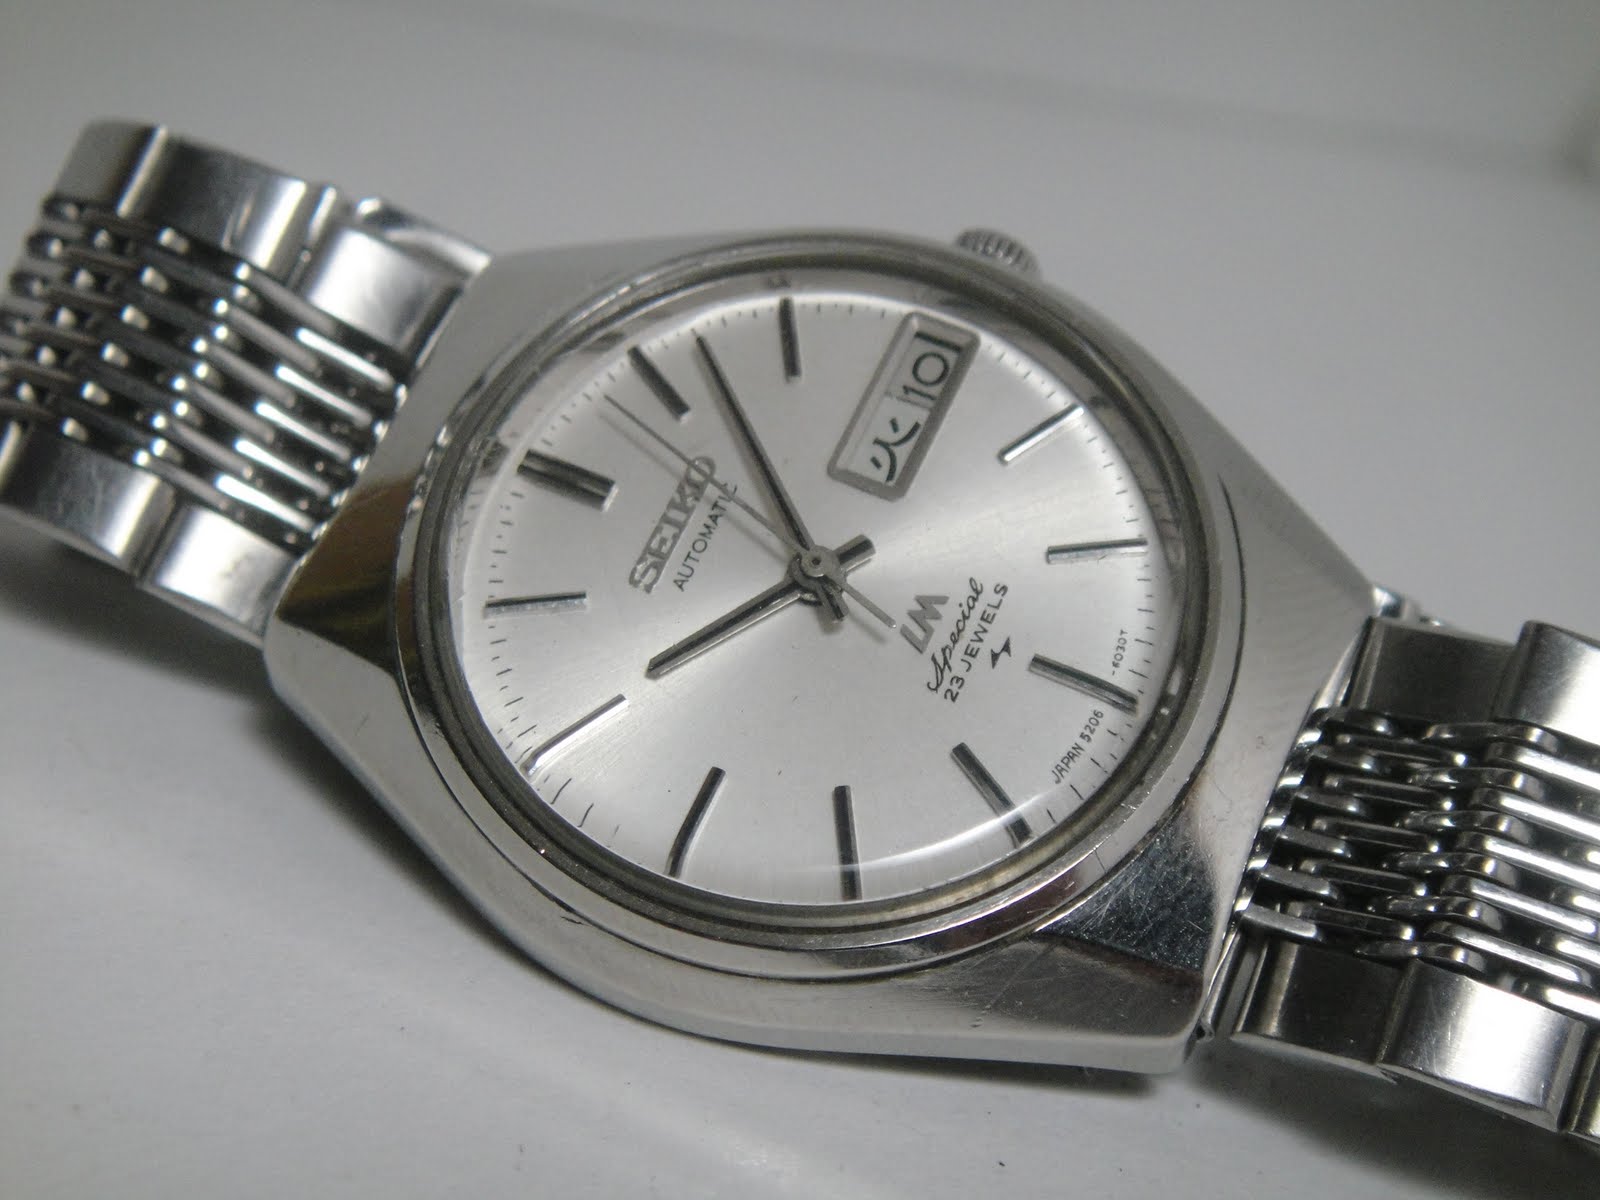 Antique Watch Bar: Brand: SEIKO LORD MATIC SPECIAL 5206-6050 SL10 SOLD